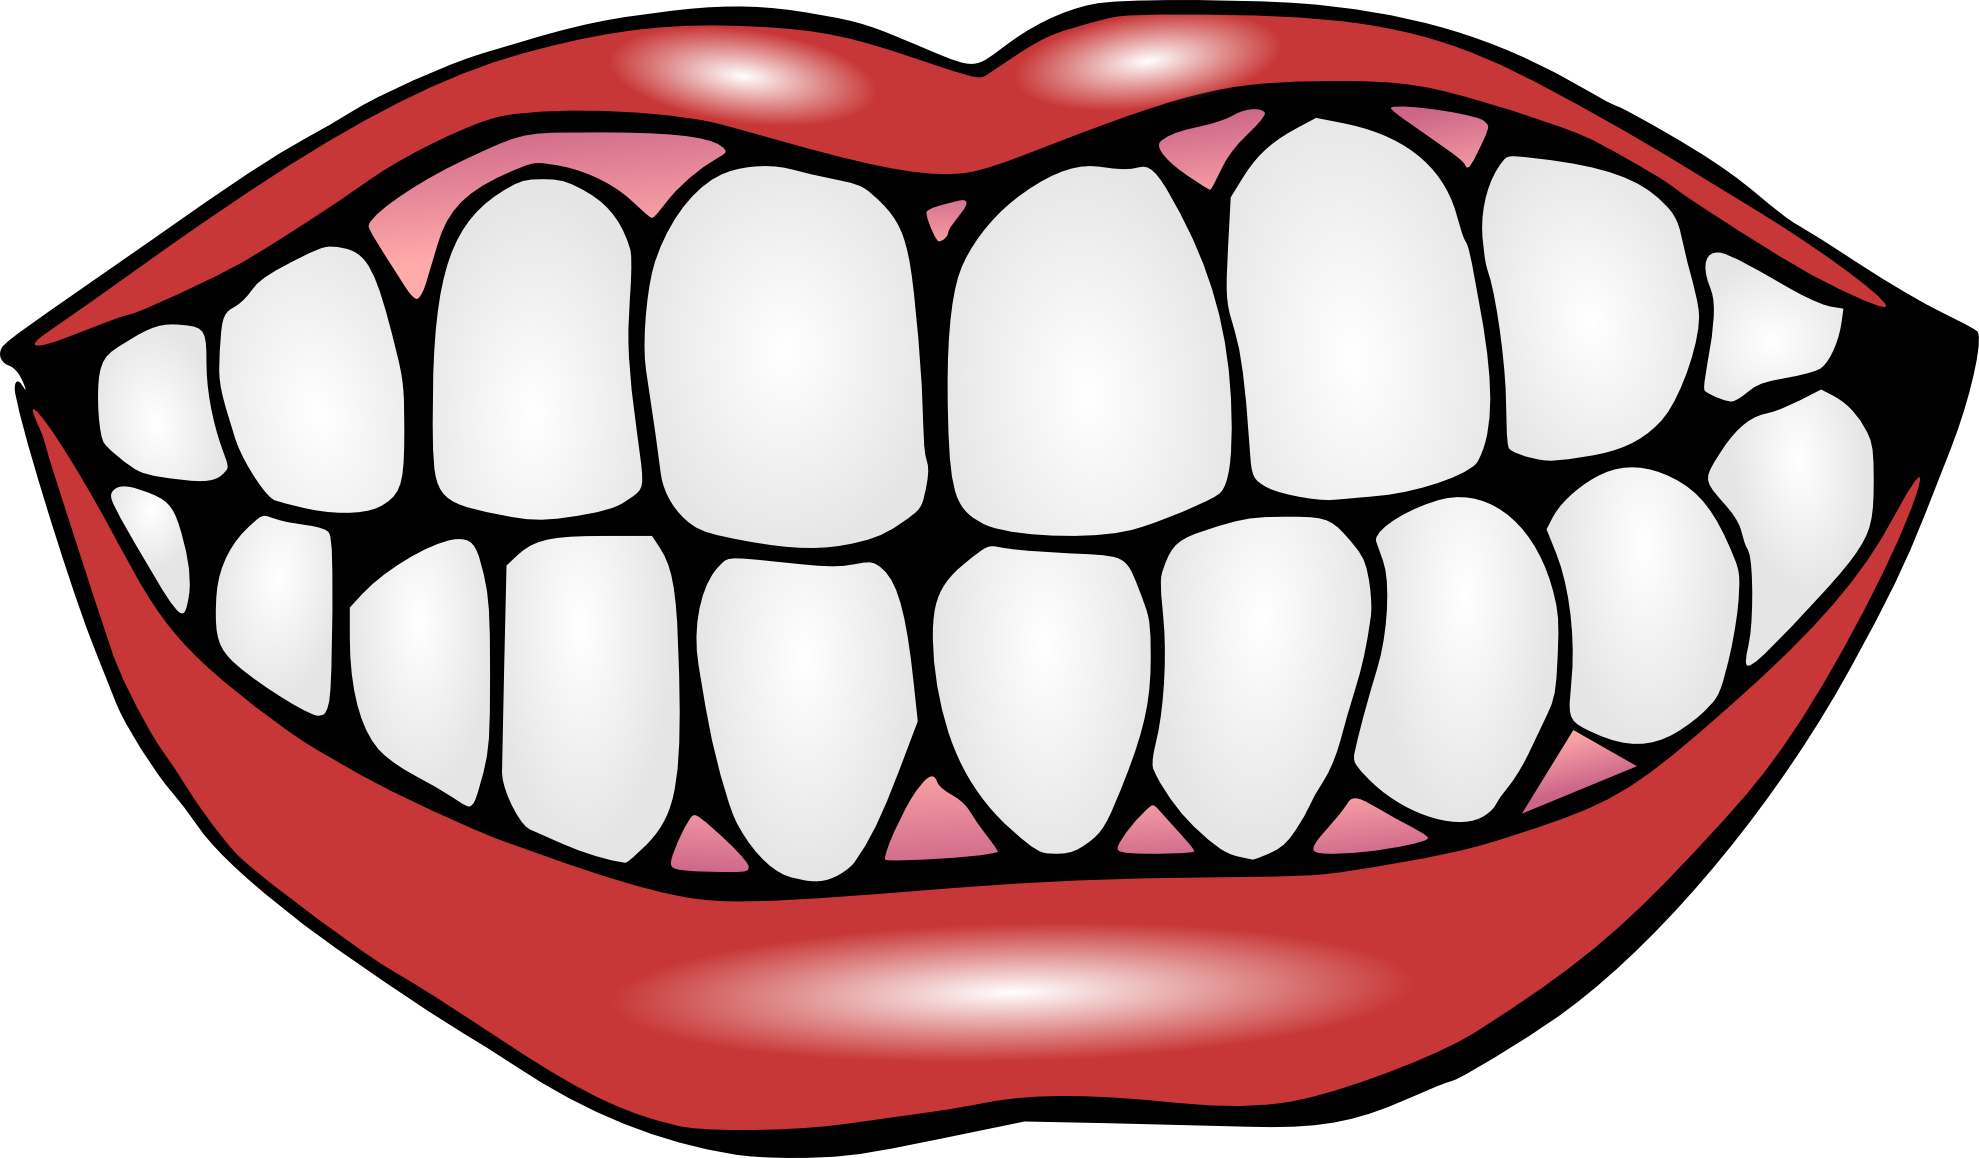 sore tooth clipart - photo #43